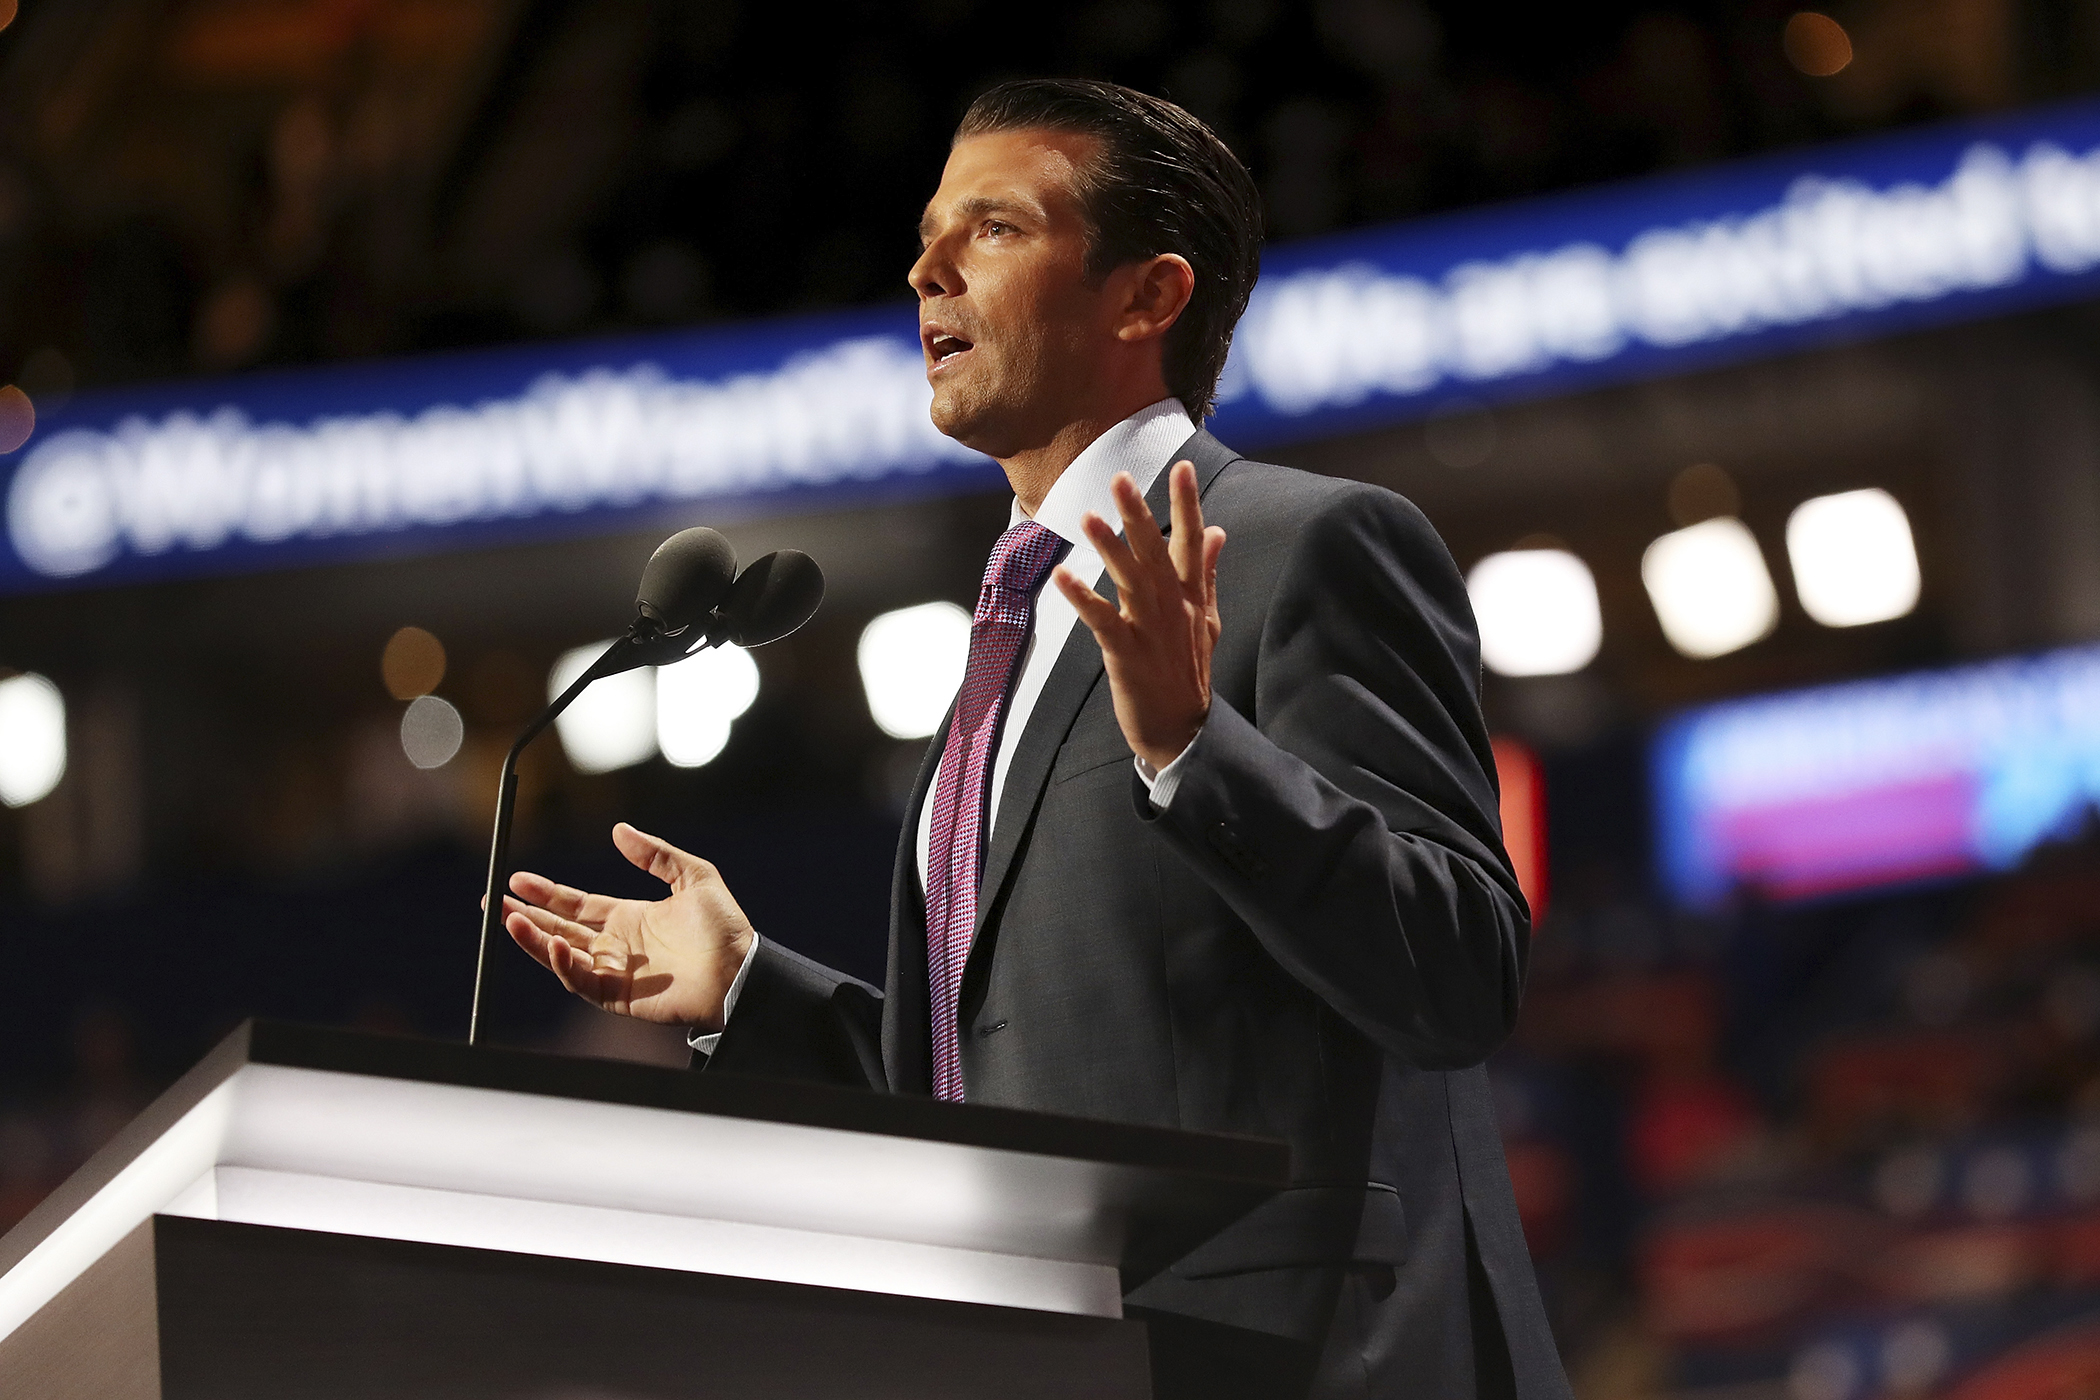 Donald Trump Jr. delivers a speech on the second day of the Republican National Convention on July 19, 2016 at the Quicken Loans Arena in Cleveland, Ohio. Republican presidential candidate Donald Trump received the number of votes needed to secure the party's nomination. An estimated 50,000 people are expected in Cleveland, including hundreds of protesters and members of the media. The four-day Republican National Convention kicked off on July 18.